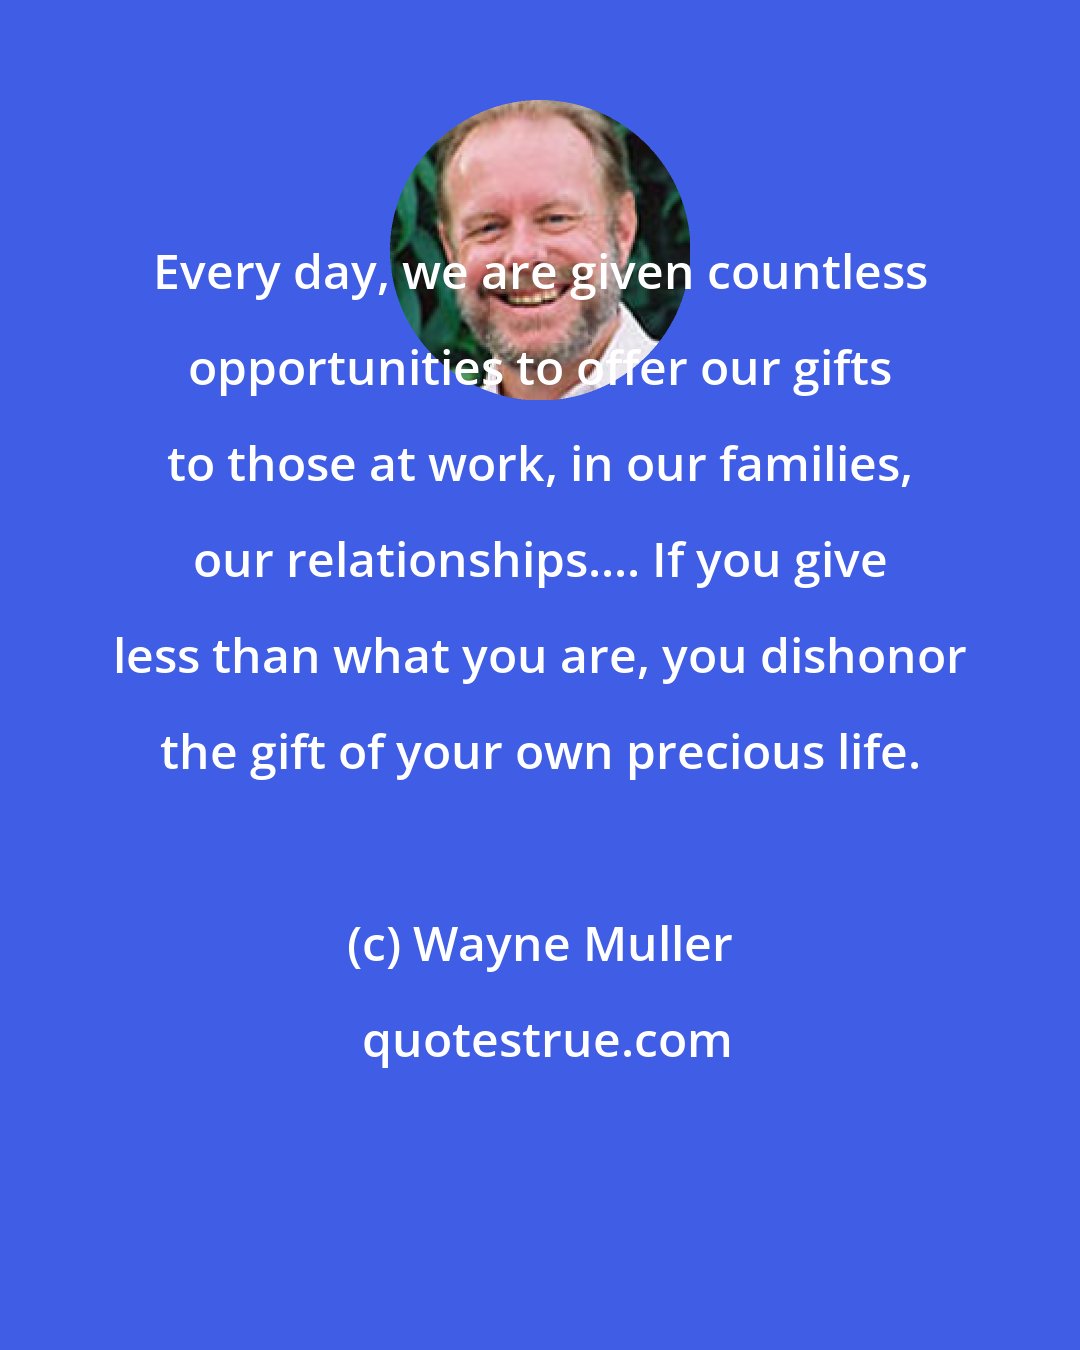 Wayne Muller: Every day, we are given countless opportunities to offer our gifts to those at work, in our families, our relationships.... If you give less than what you are, you dishonor the gift of your own precious life.